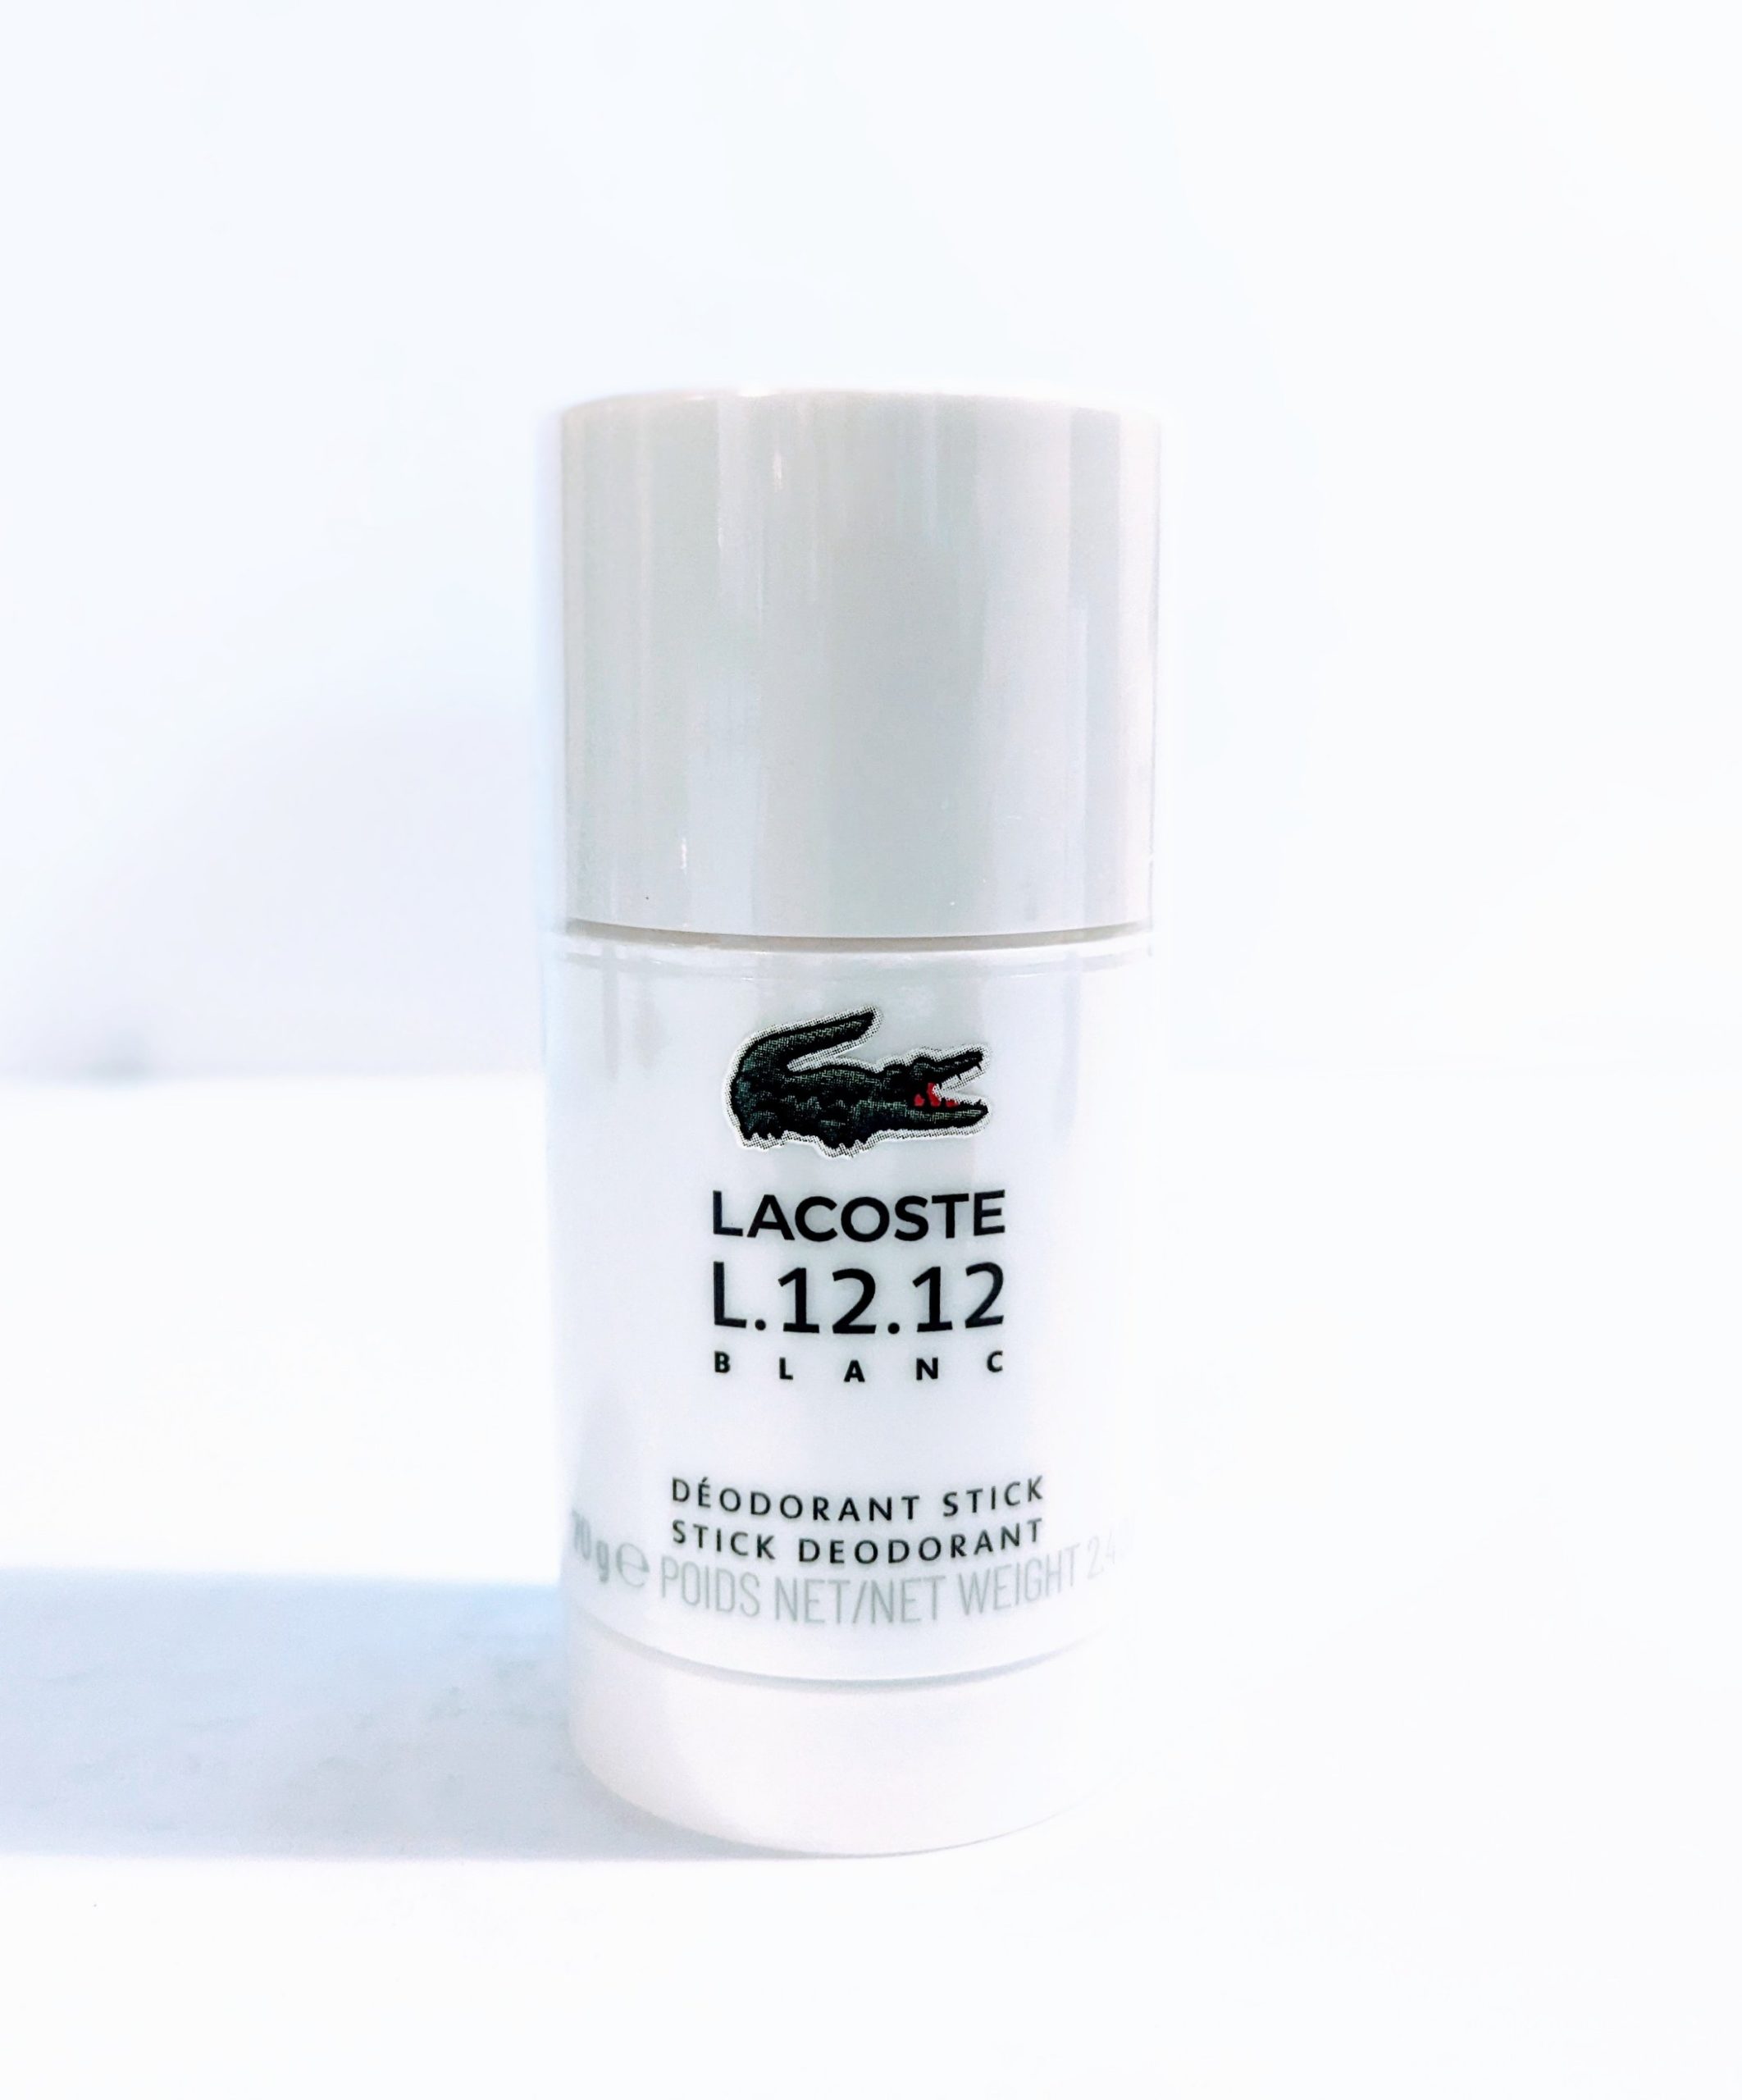 A bottle of Lacoste L.12.12 Blanc Pure Deodorant Stick for Men on a white surface.